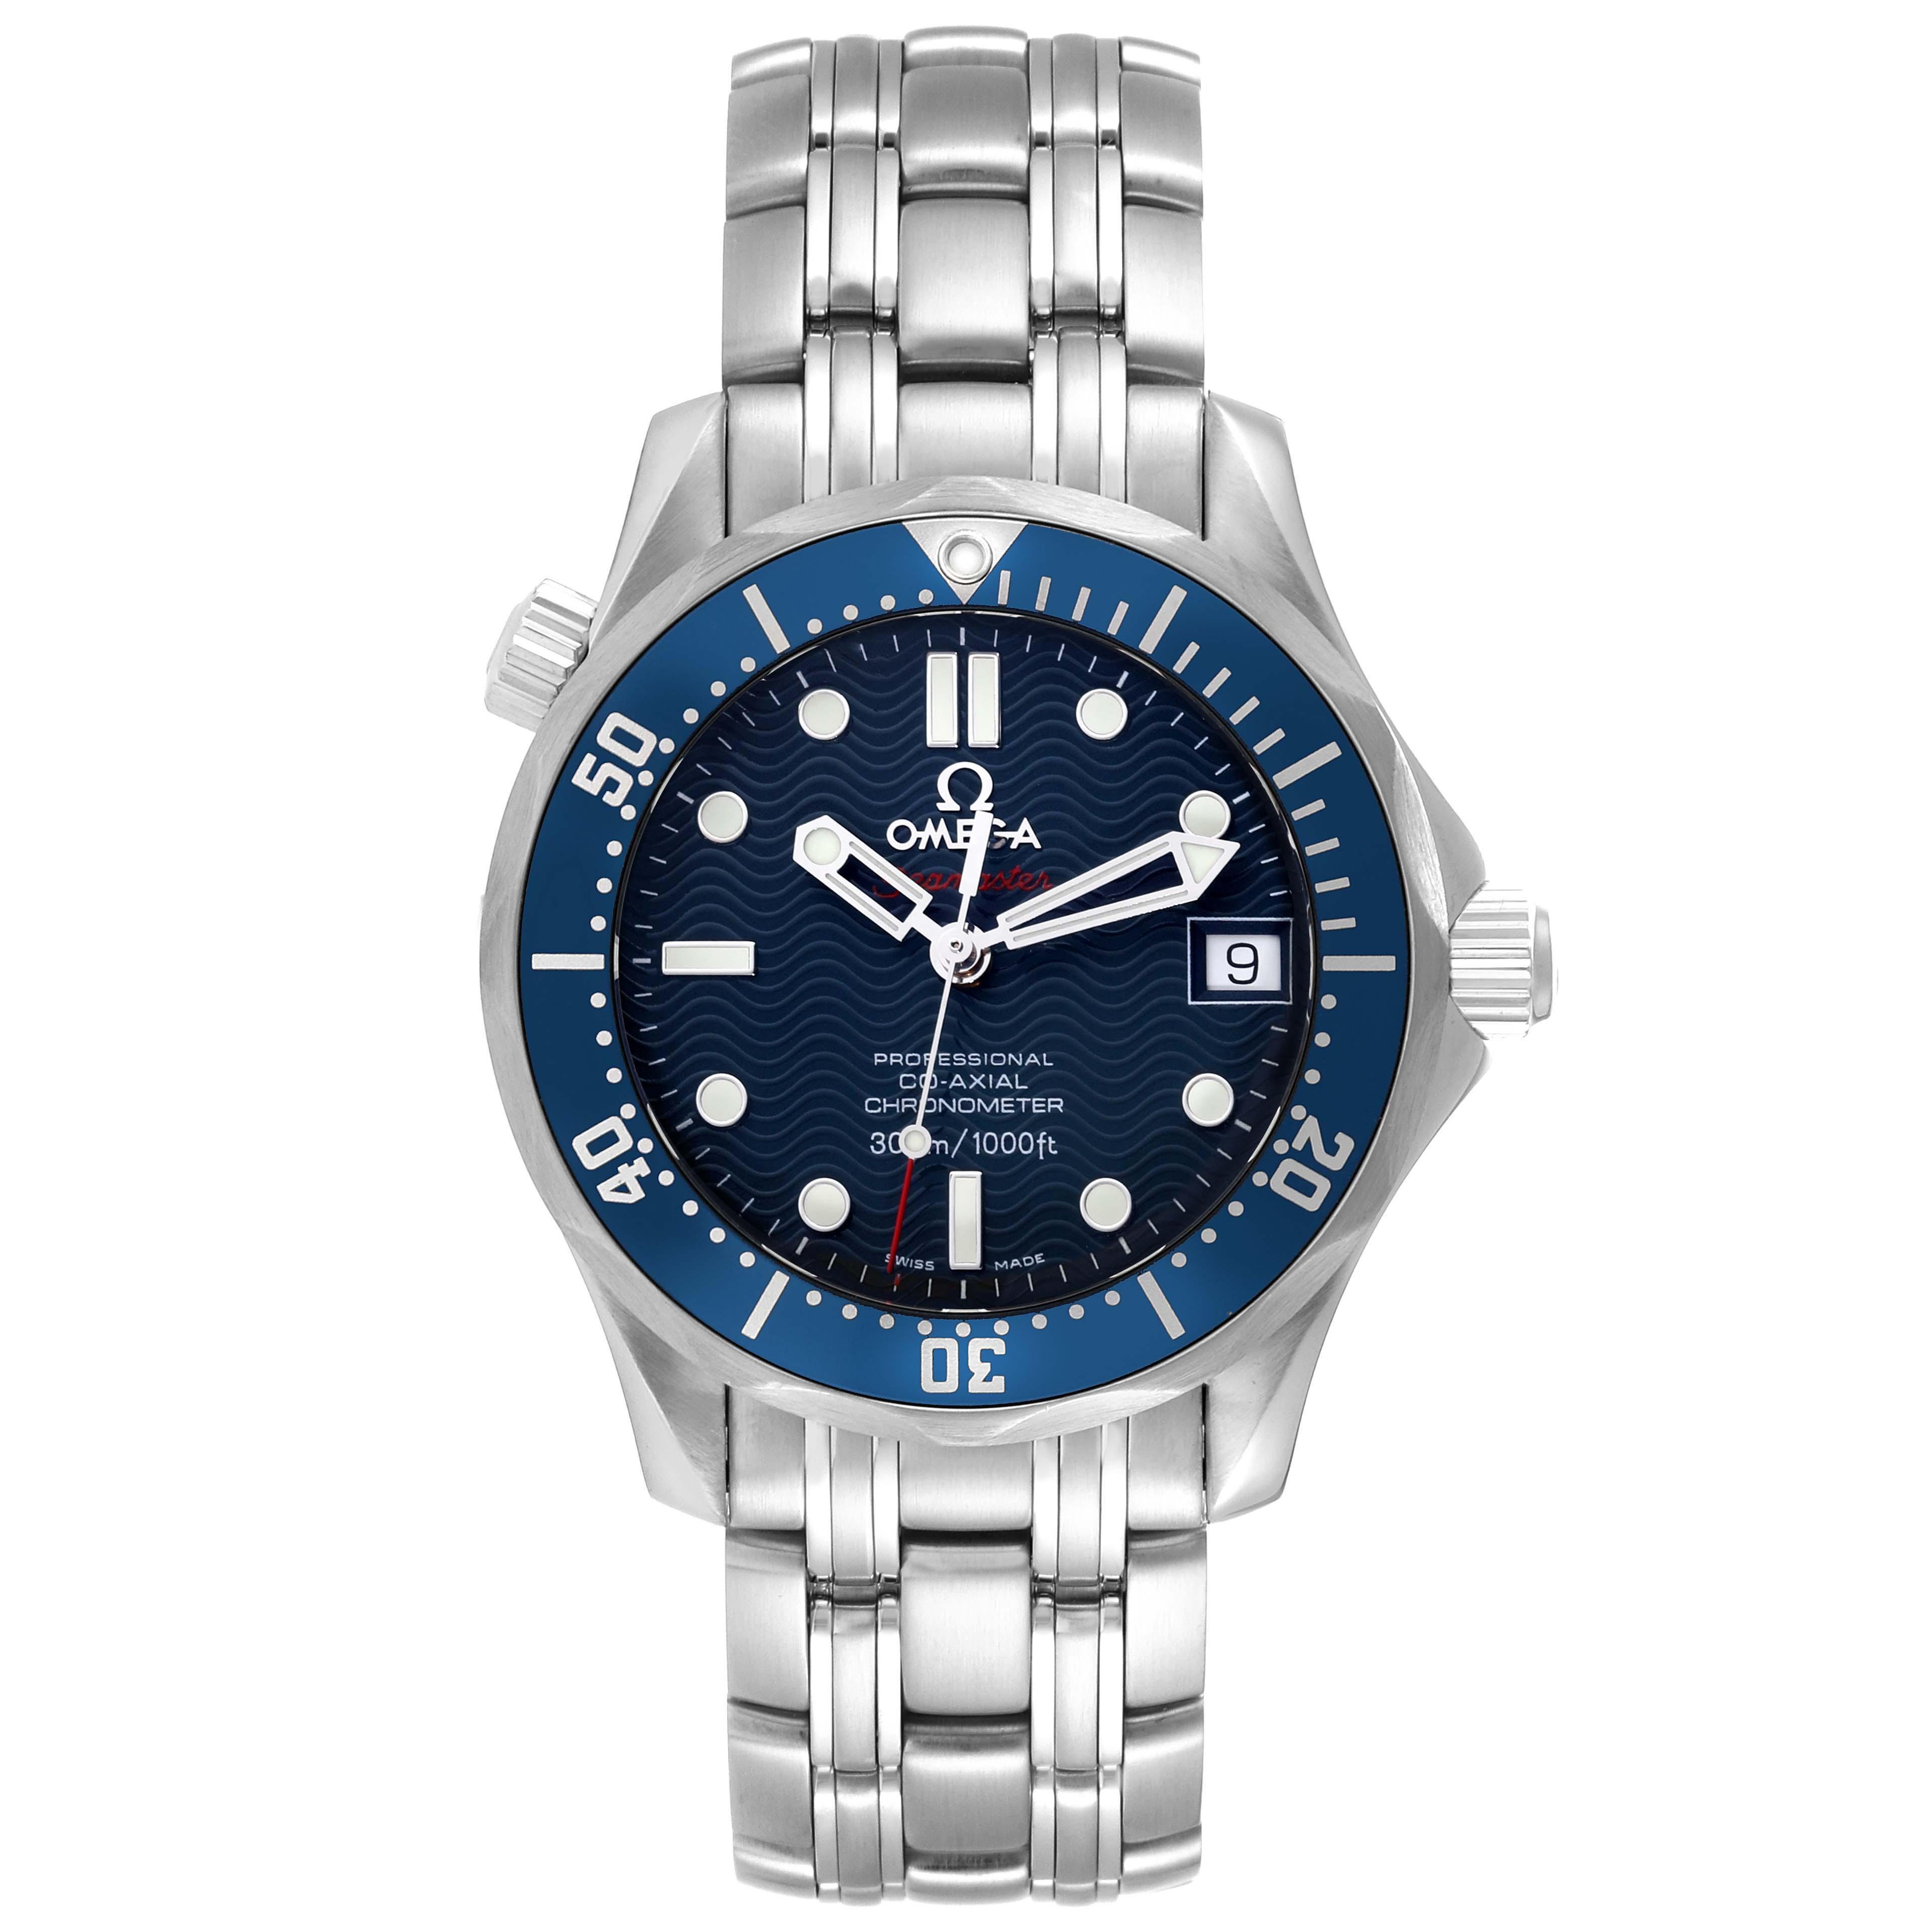 Omega Seamaster Midsize 36mm Co-Axial Steel Mens Watch 2222.80.00. Automatic self-winding Co-Axial movement. Stainless steel case 36mm in diameter. Helium escape valve at 10 o'clock. Omega logo on the crown. Unidirectional rotating bezel with blue